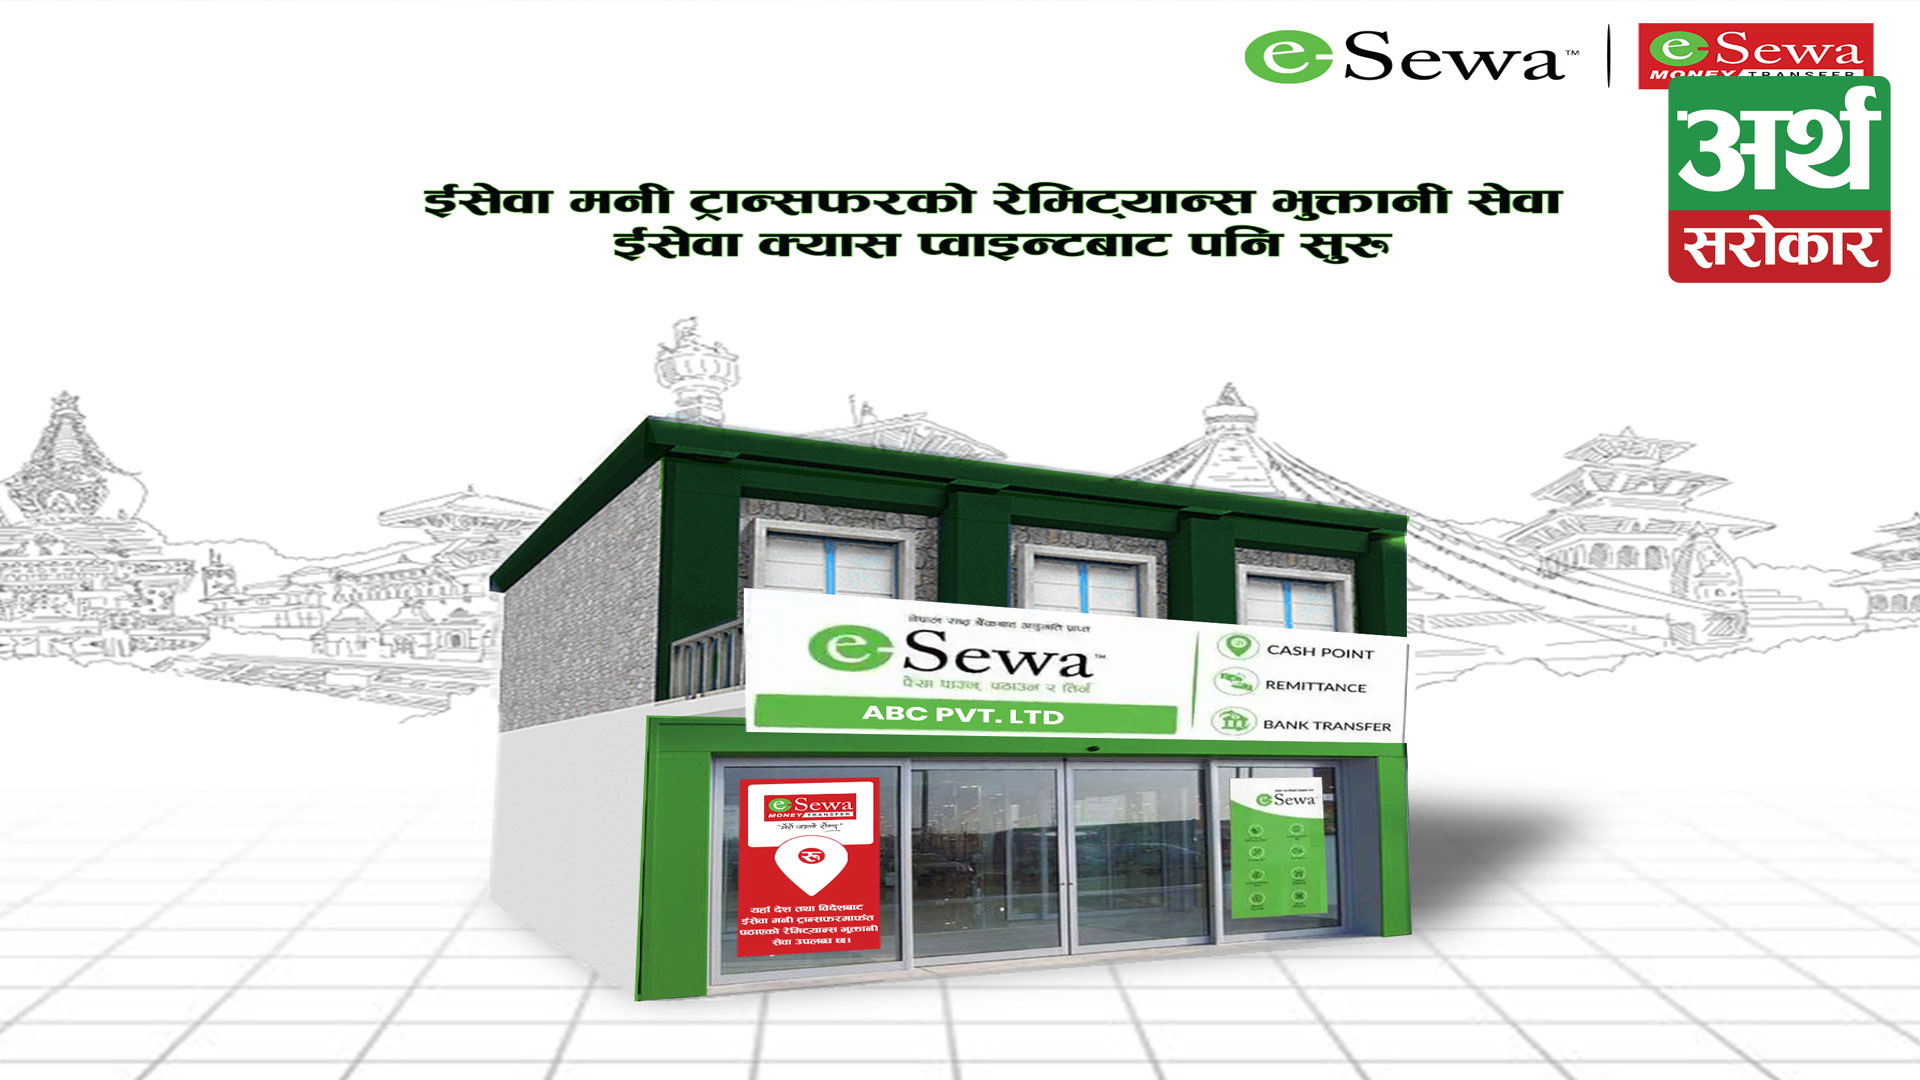 Remittance services of Esewa Money Transfer to be available from eSewa agents